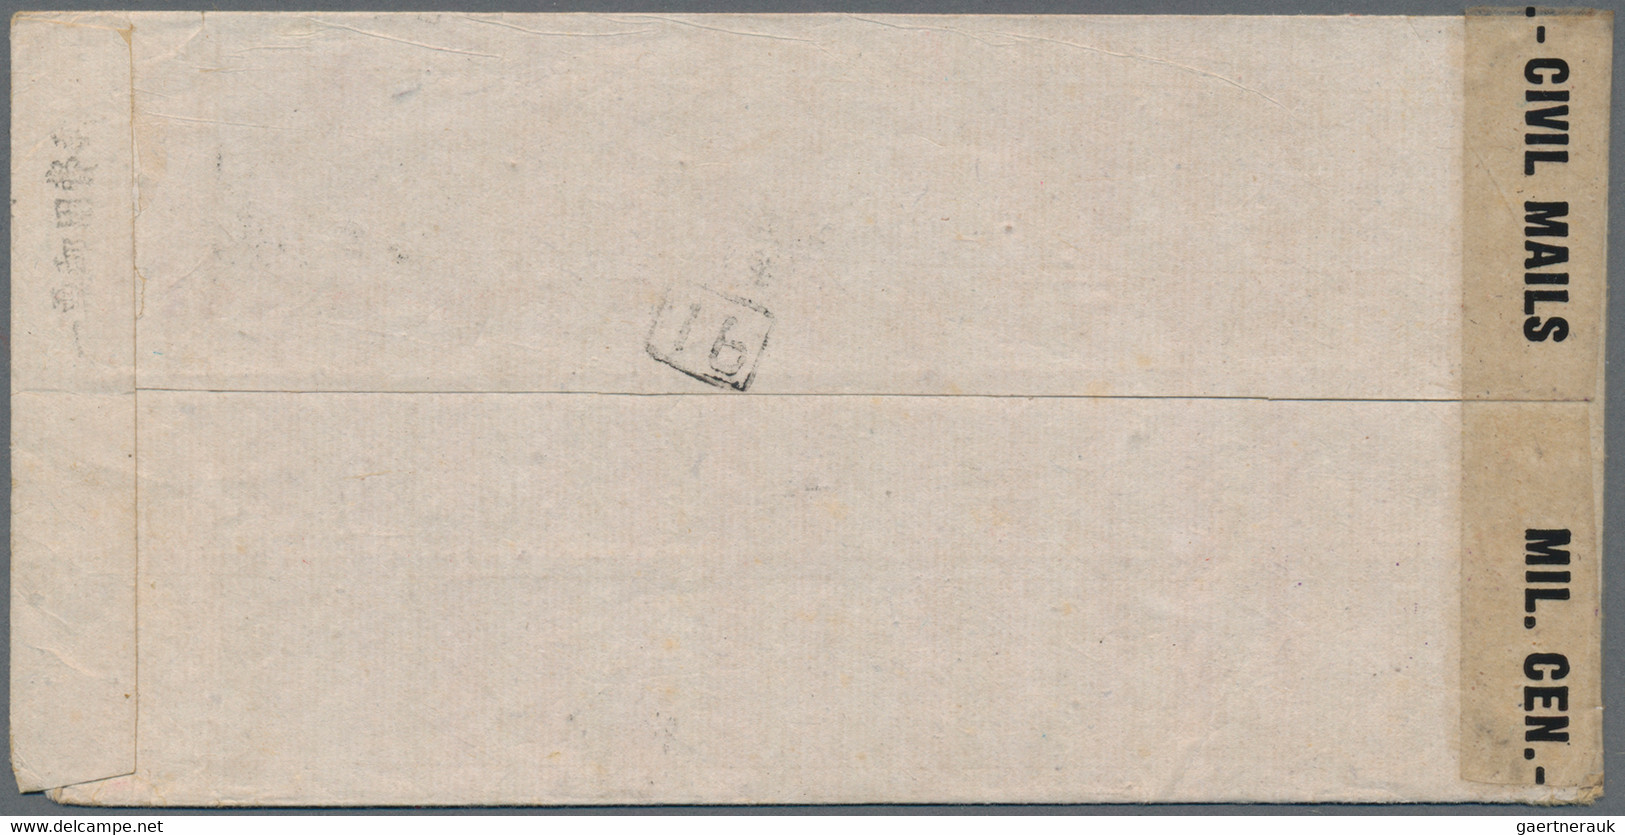 China: 1941/46, Ueberroller Usage: SYS 2 C., 8 C. Tied "CANTON 30.10.8" (October 8, 1941) To Printed - Covers & Documents